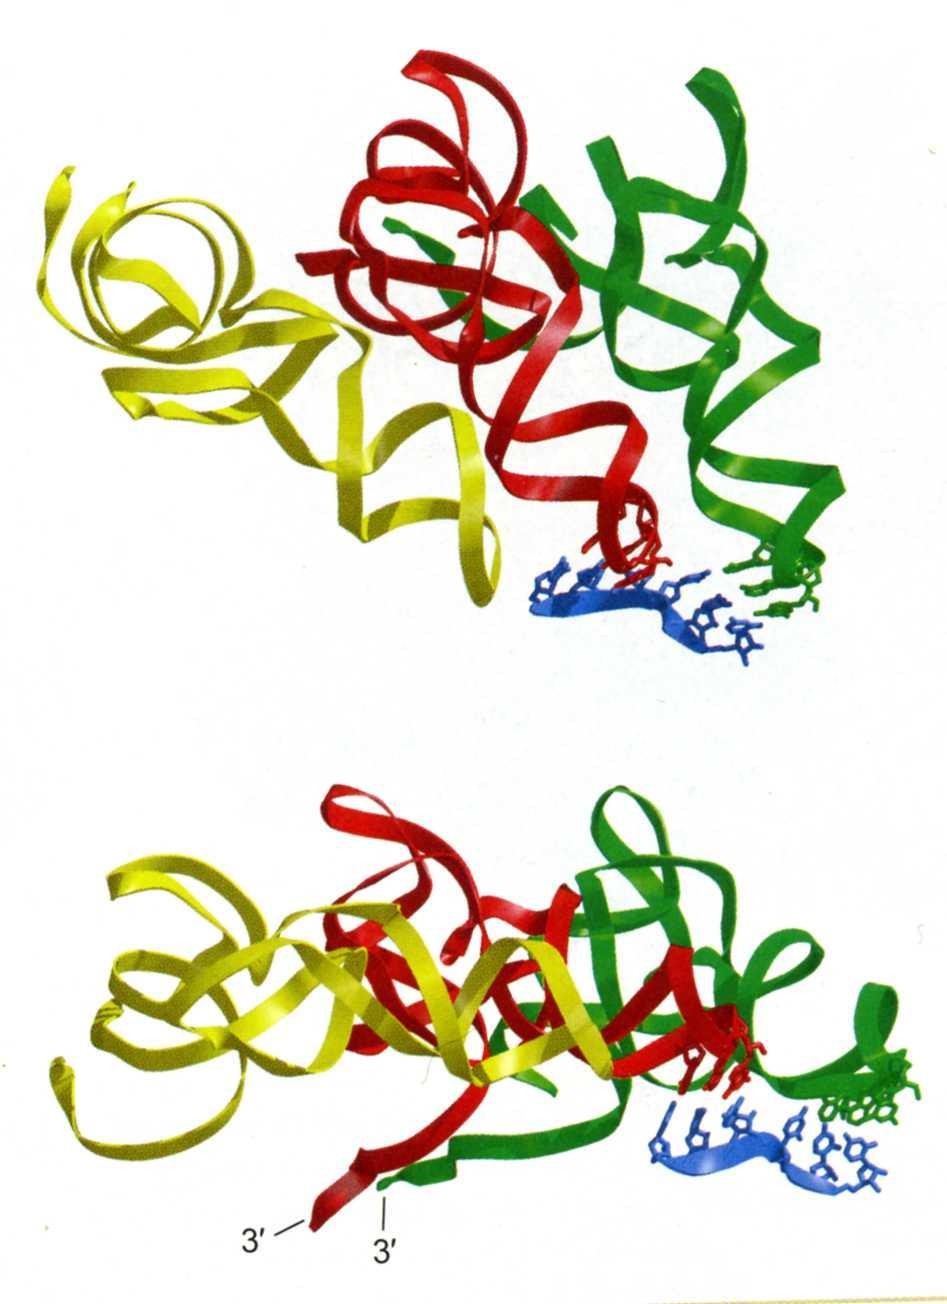 The Ribosome Interaction between A-site and P-site trnas and mrna